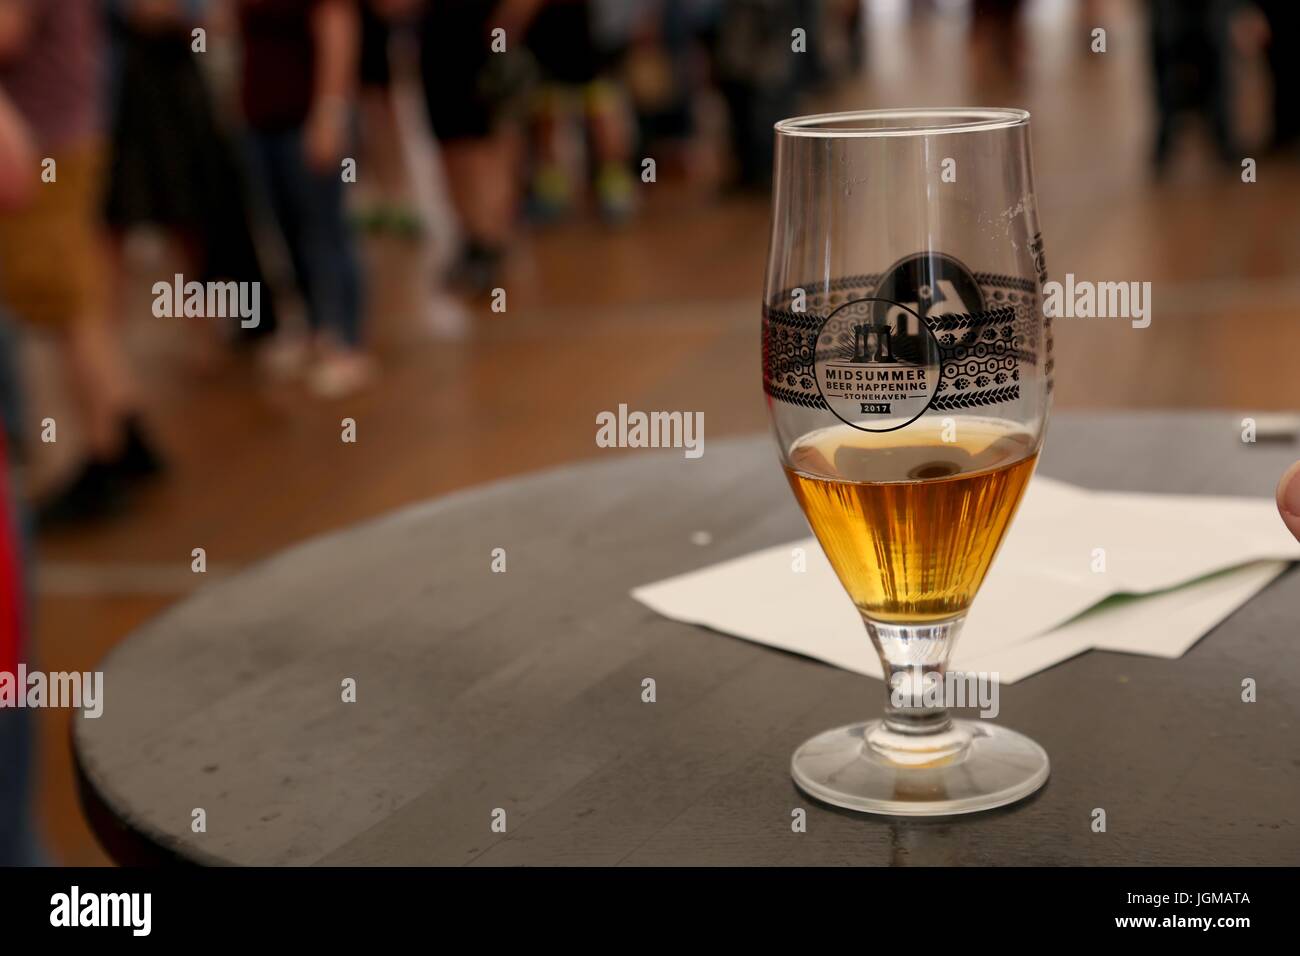 Half full glass of beer on the table at the Stonehaven Beer Festival. Stock Photo